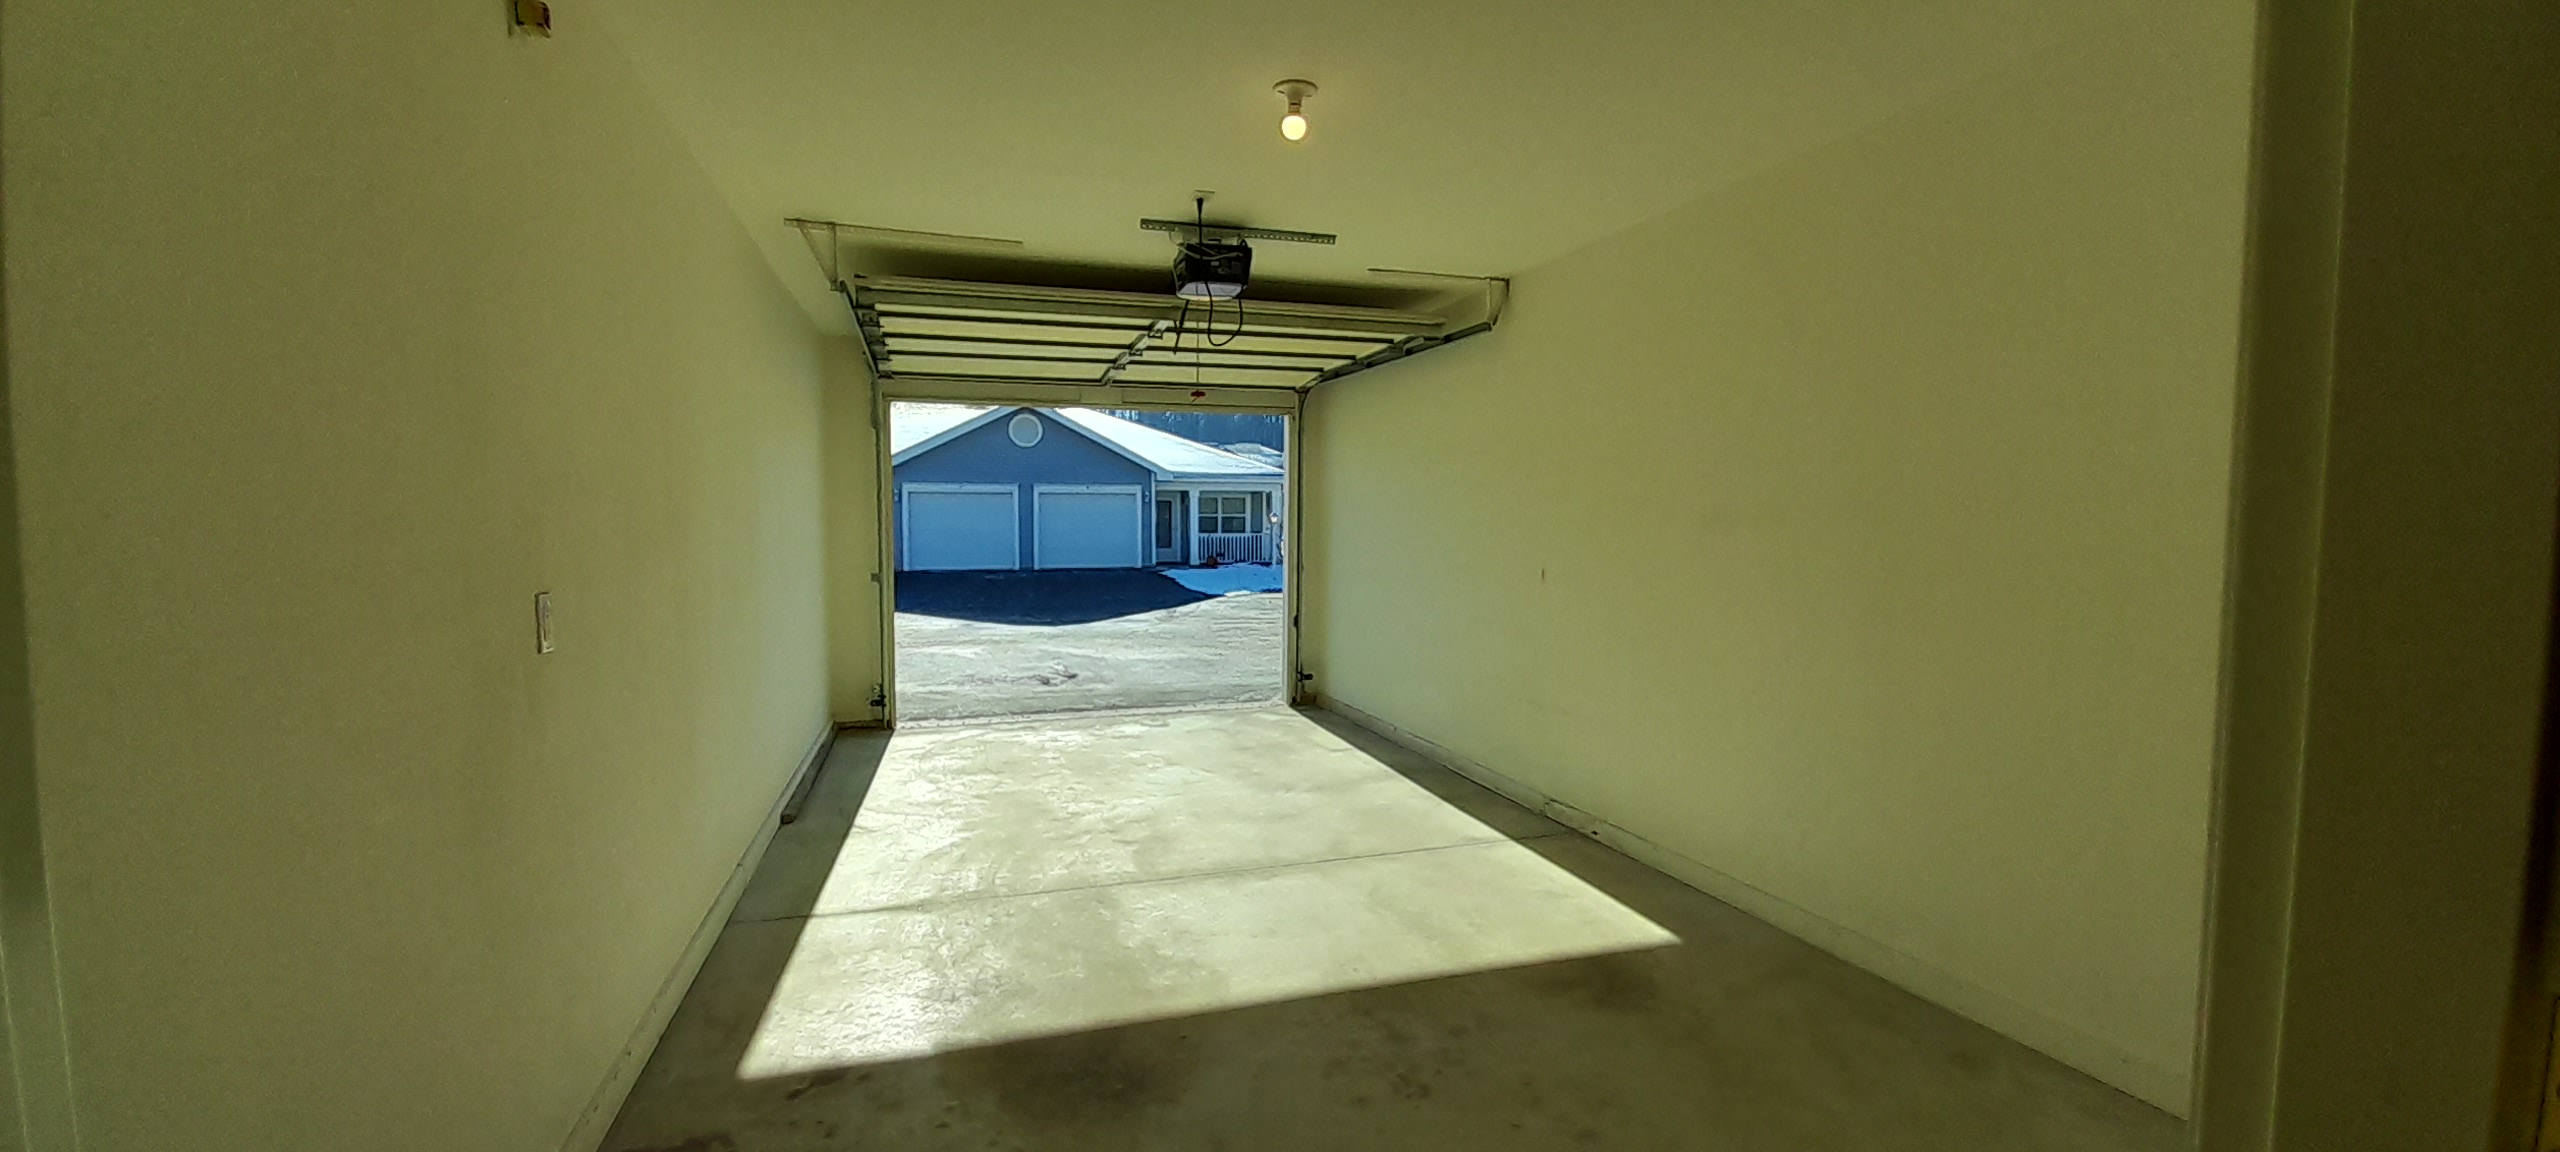 Iola SV garage space view looking out